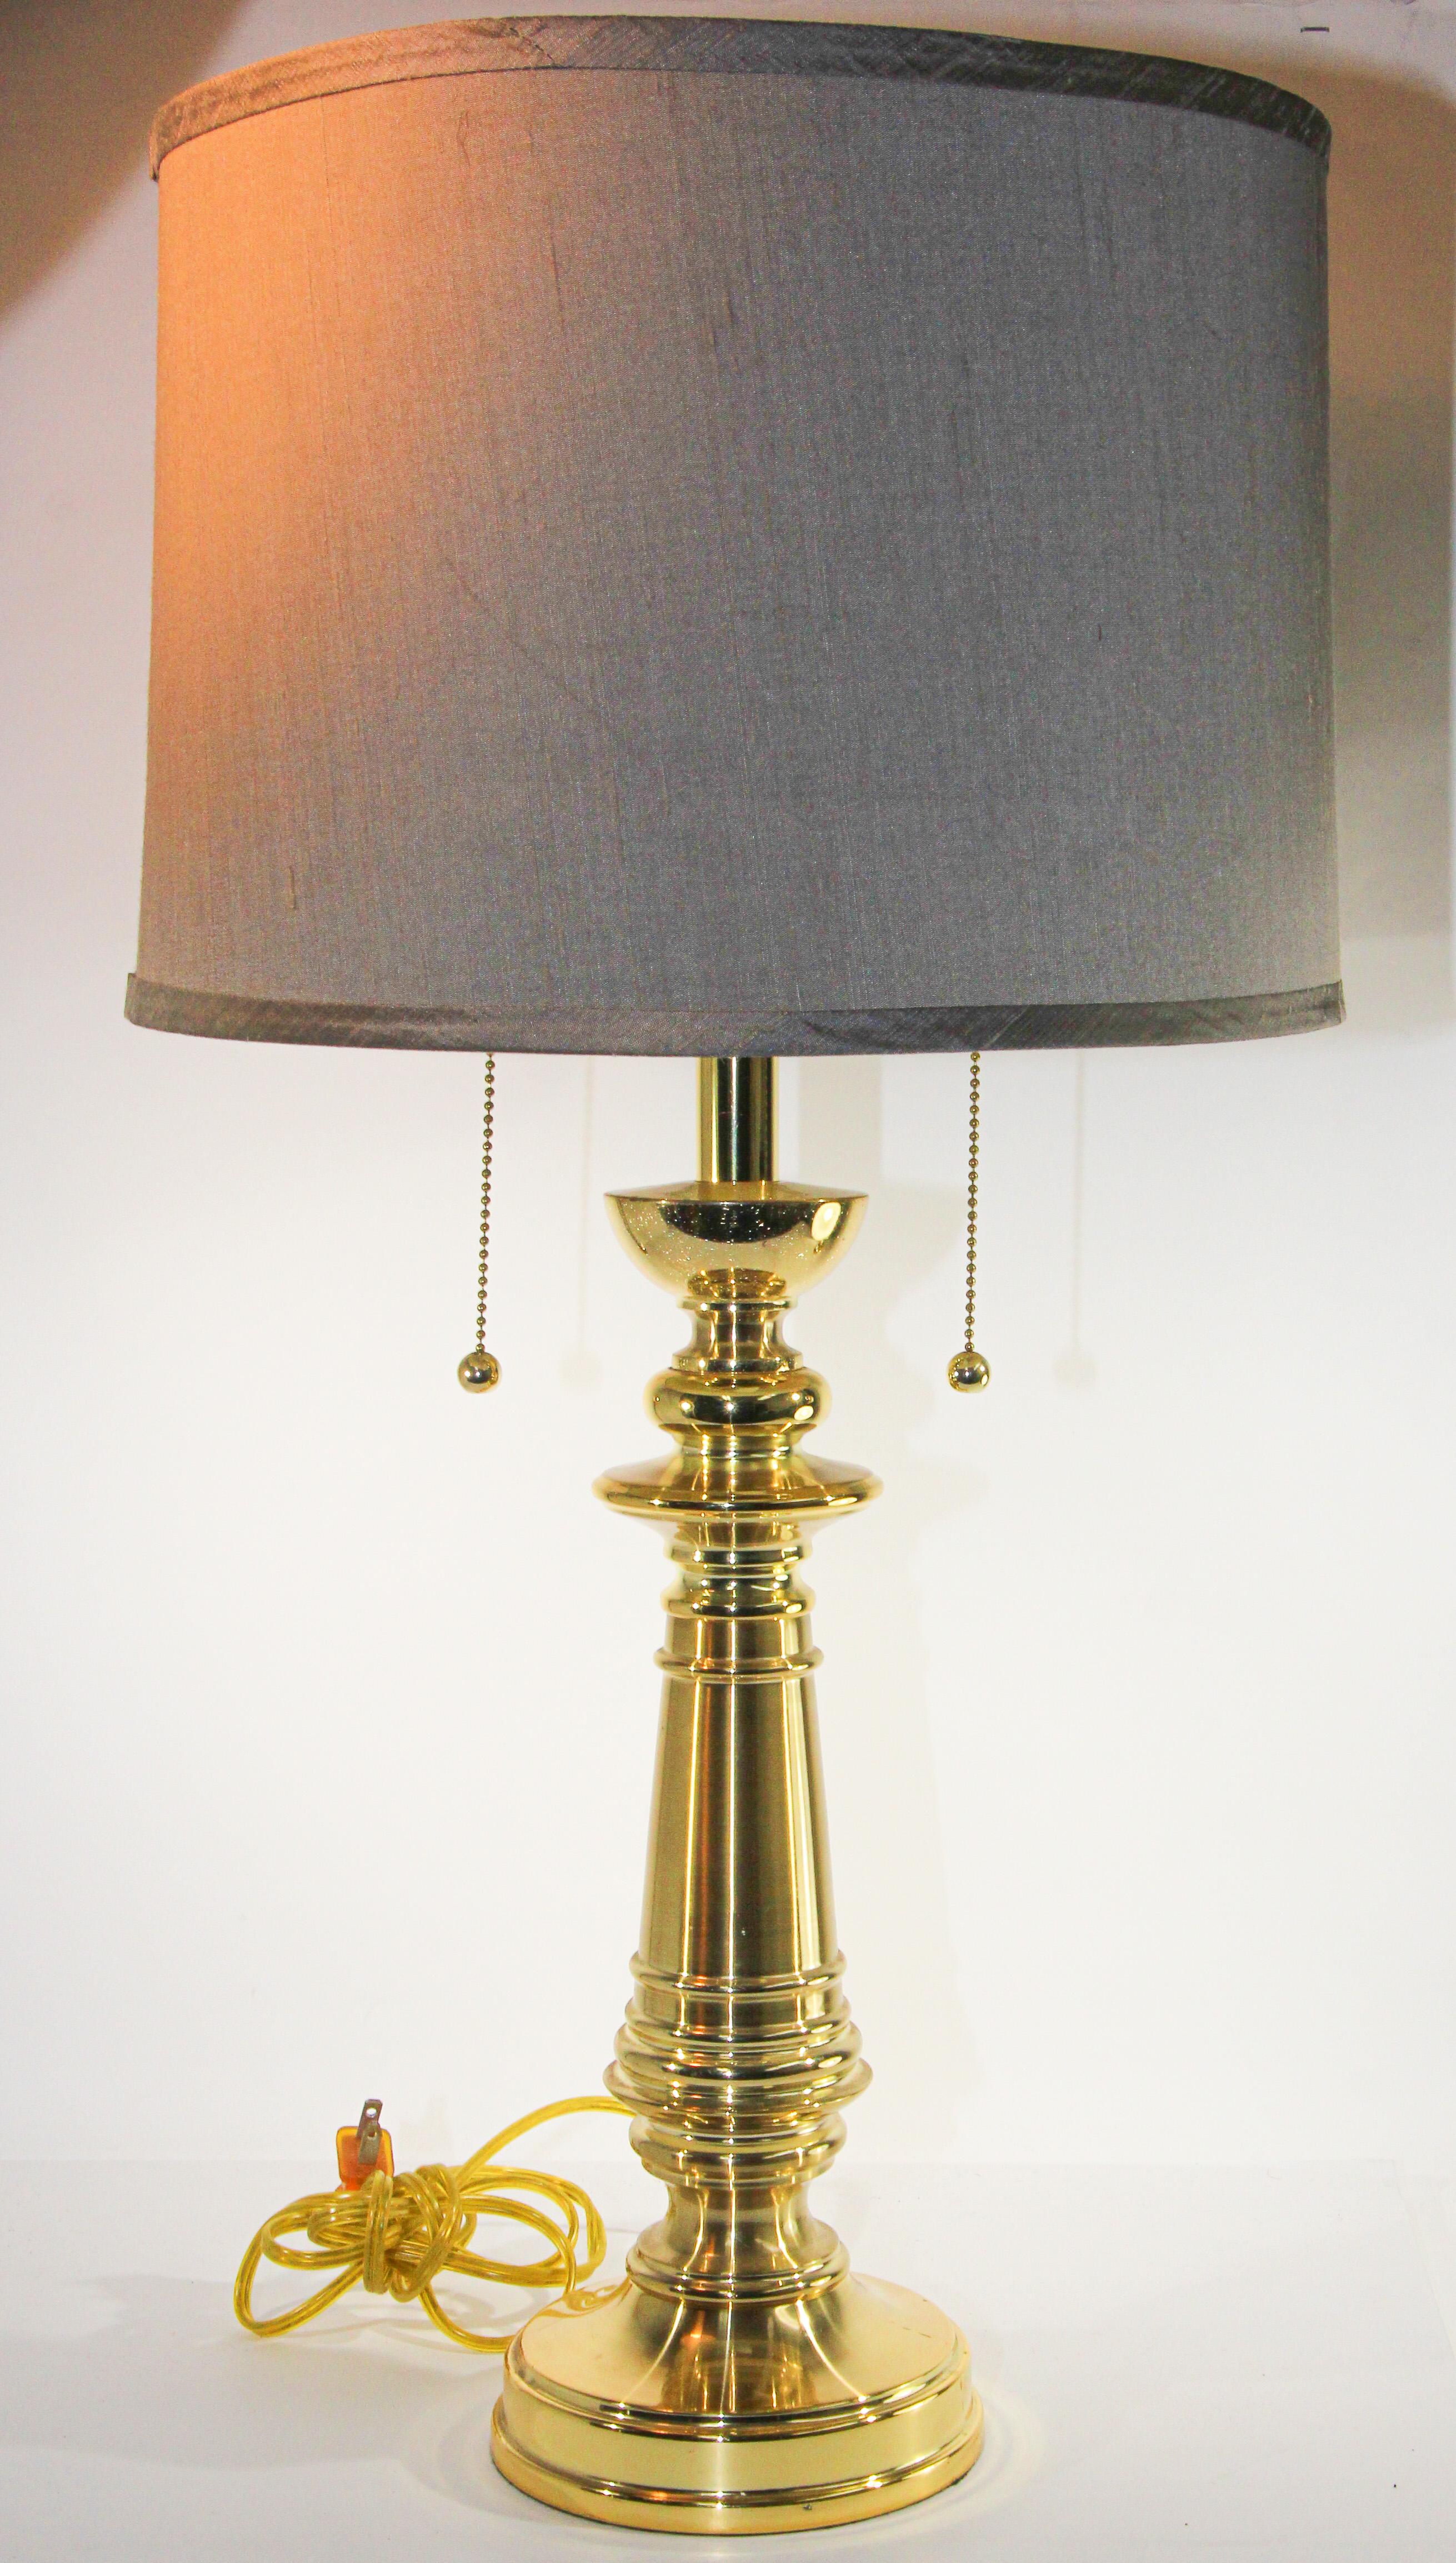 Vintage polished brass turned column table lamp.
Hollywood Regency style turned column form table lamp.
Crafted of solid cast brass, this elegant table lamp has a polished brass finish. 
On-off switch on double sockets. 
Traditional solid brass